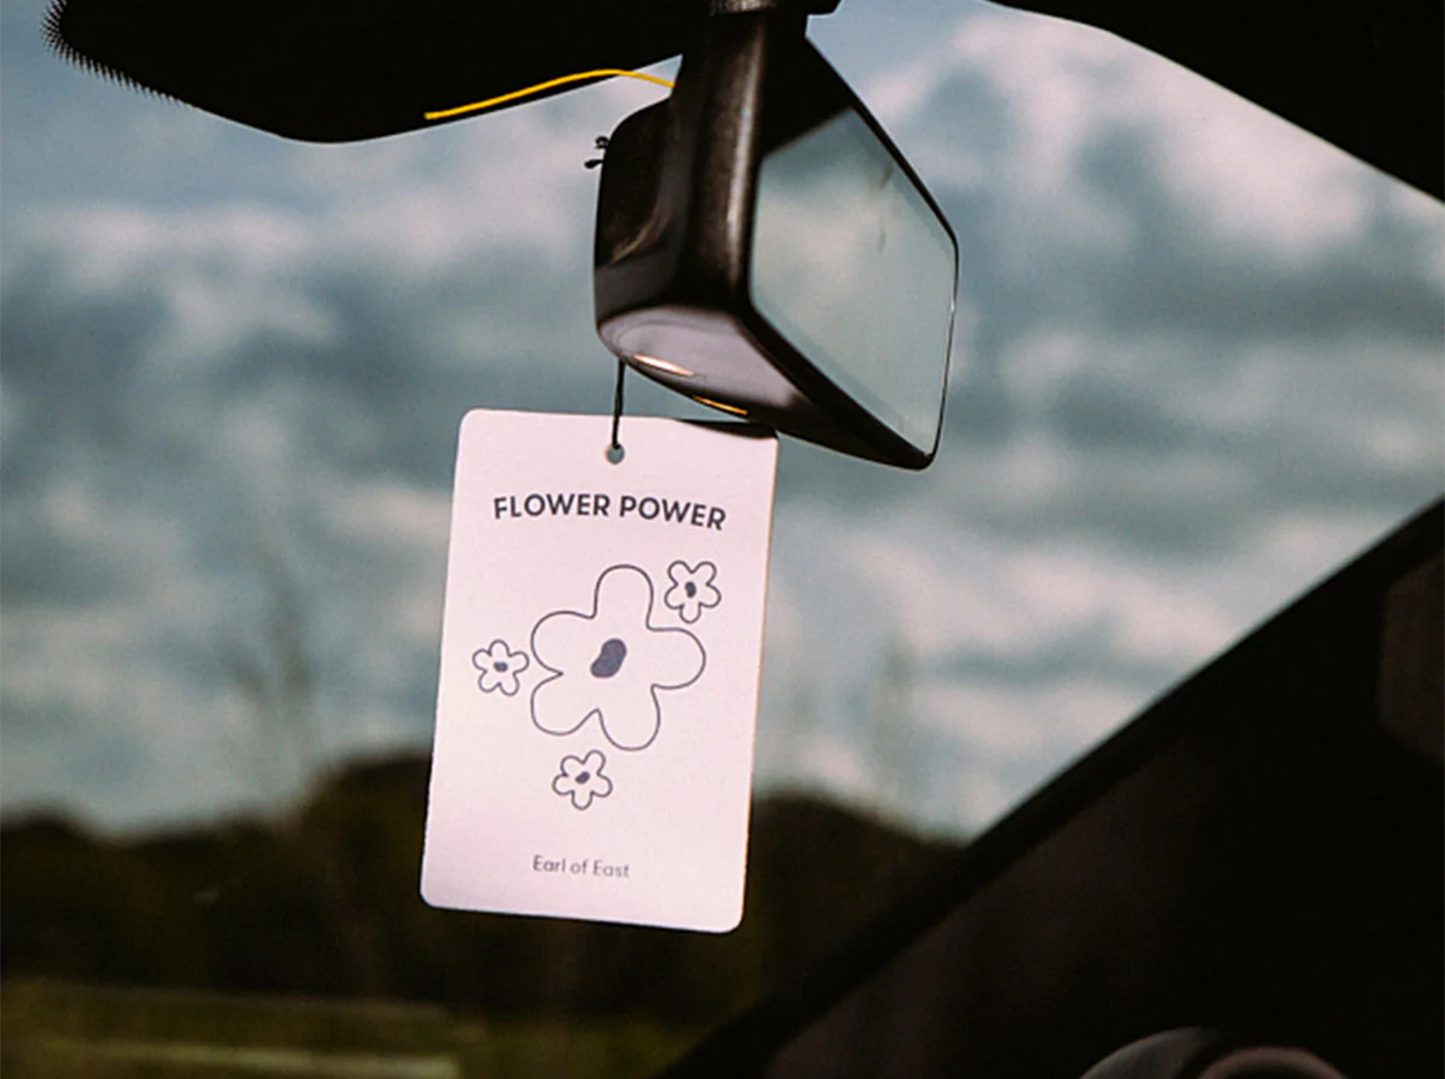 Flower Power Air Freshener by Earl of East hanging inside of a car window.